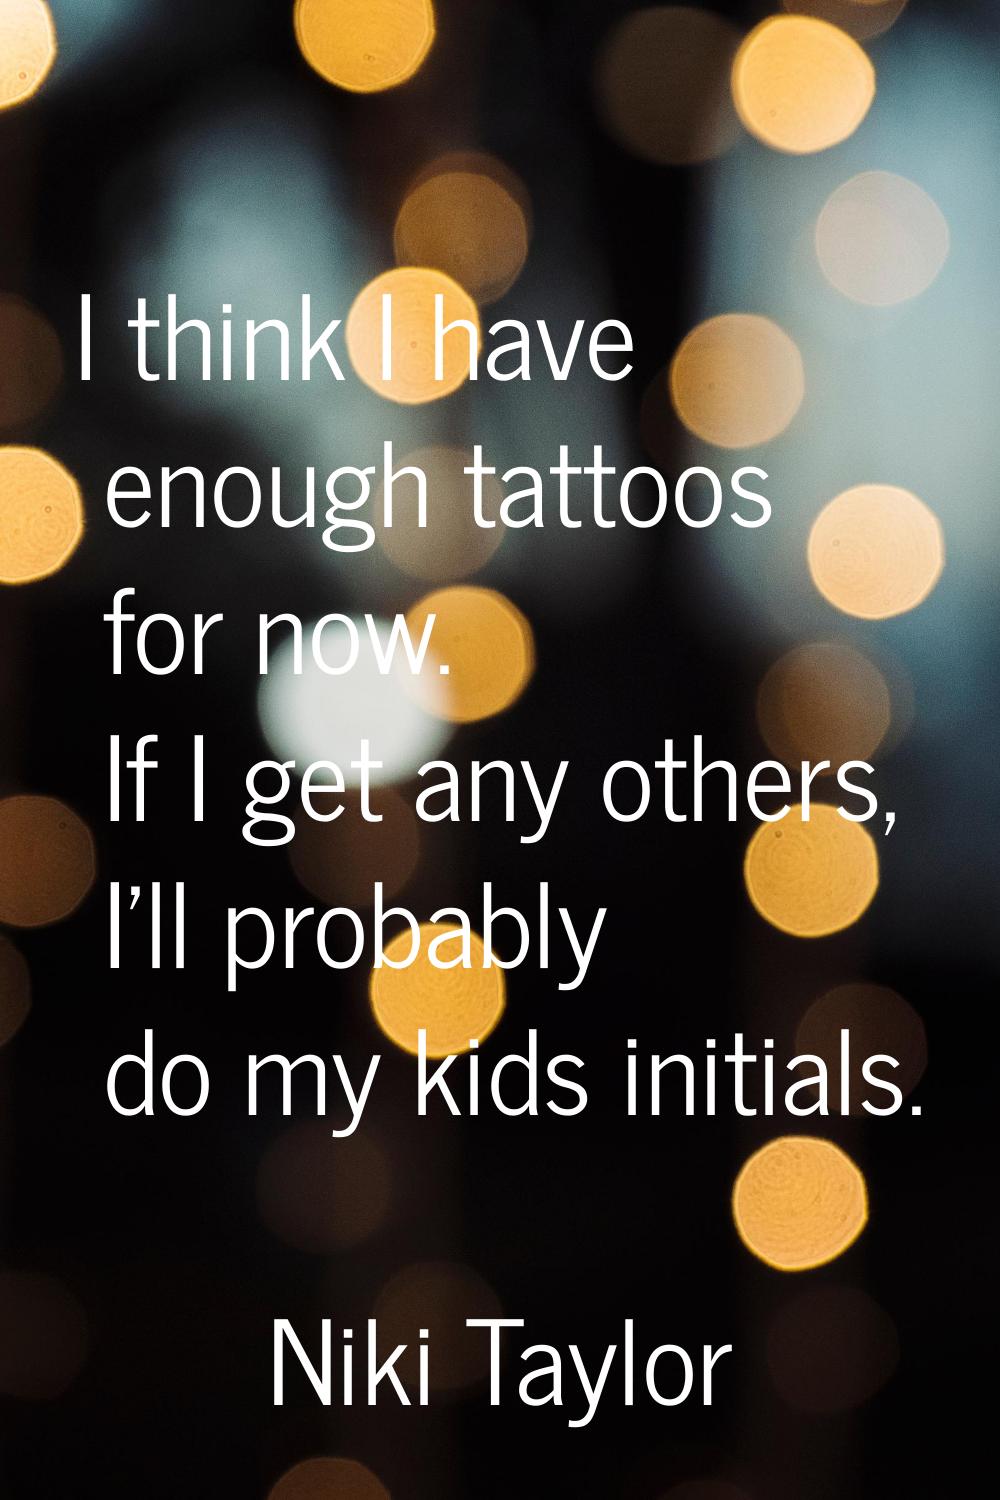 I think I have enough tattoos for now. If I get any others, I'll probably do my kids initials.